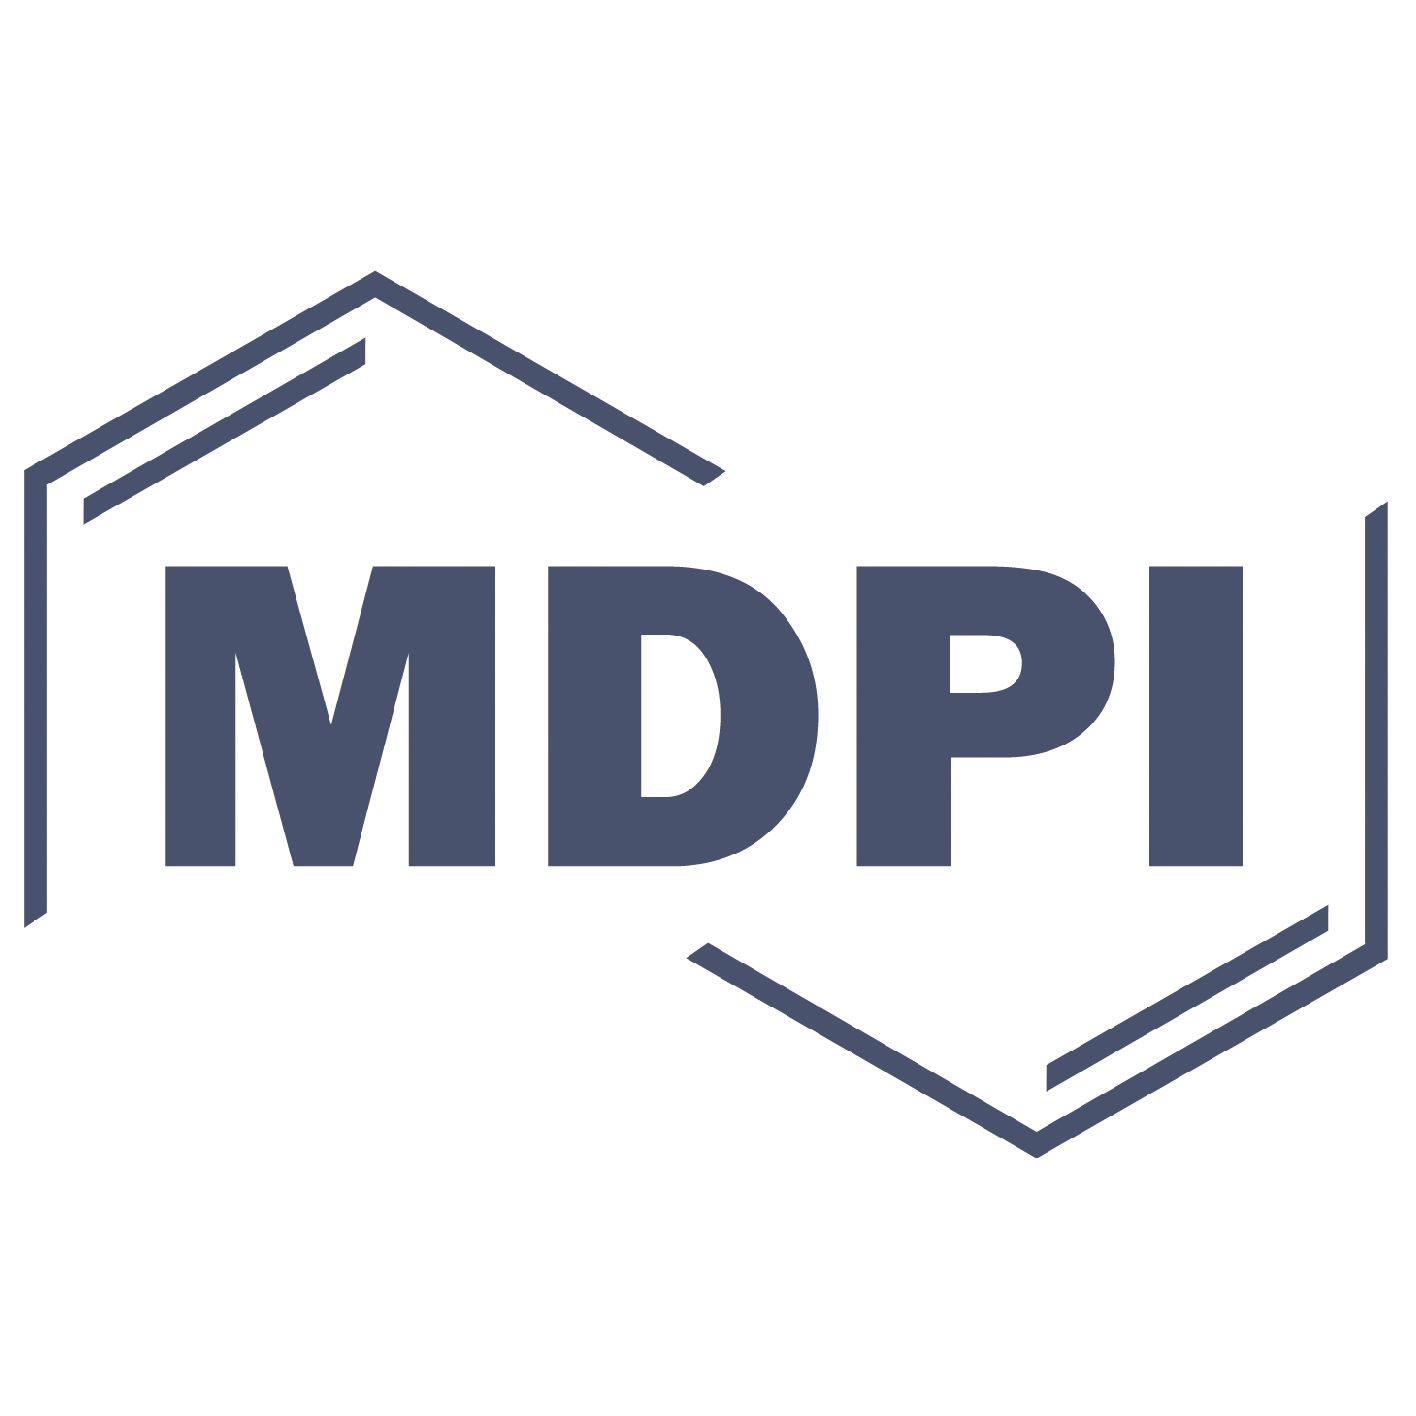 The title "MDPI" in purple over a white background.